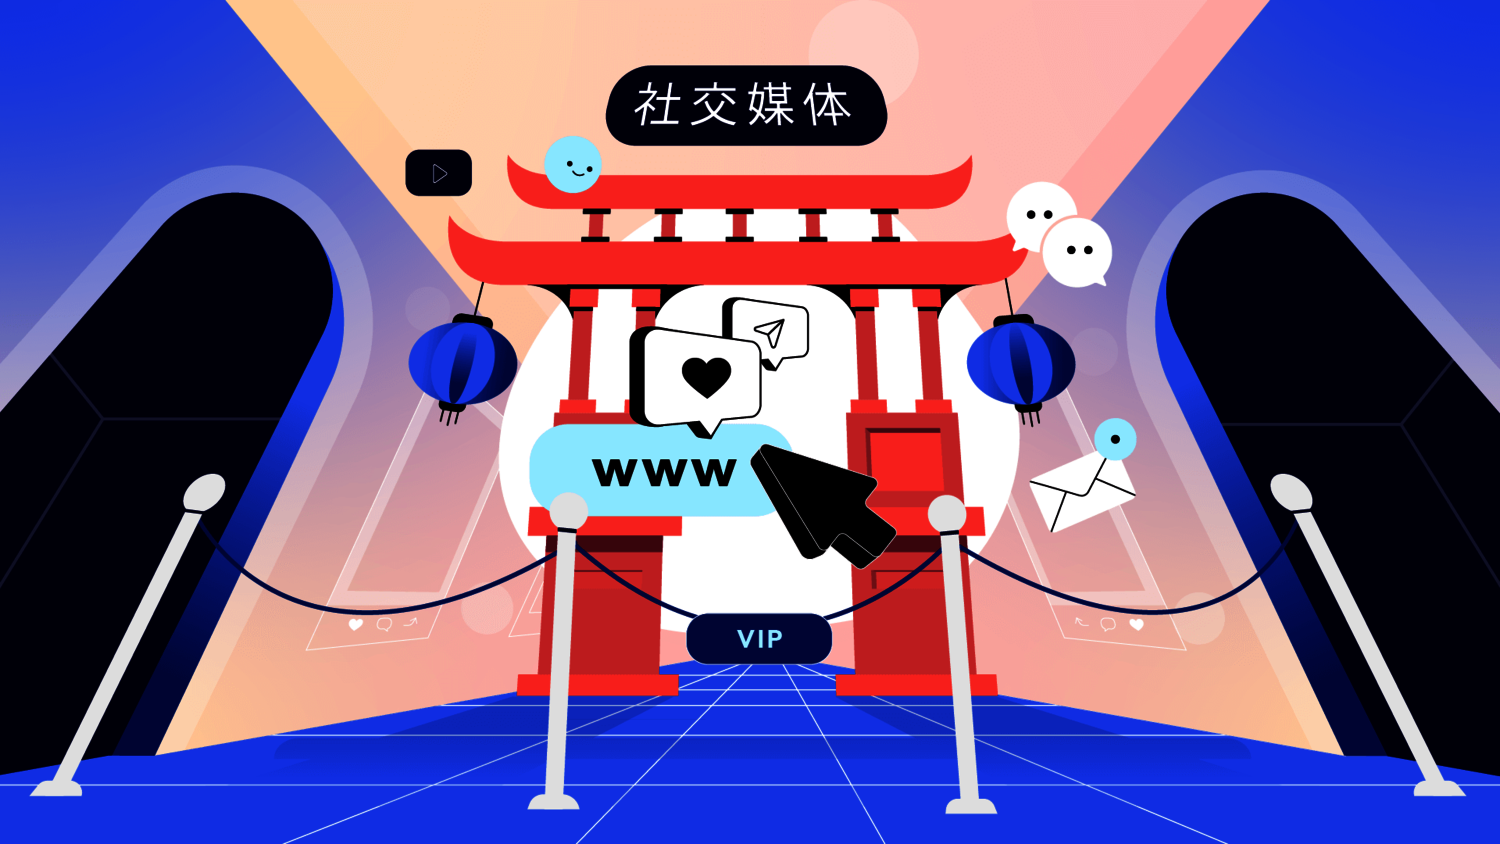 Graphic shows a Chinese gate surrounded by chat, mail. Website and social icons.